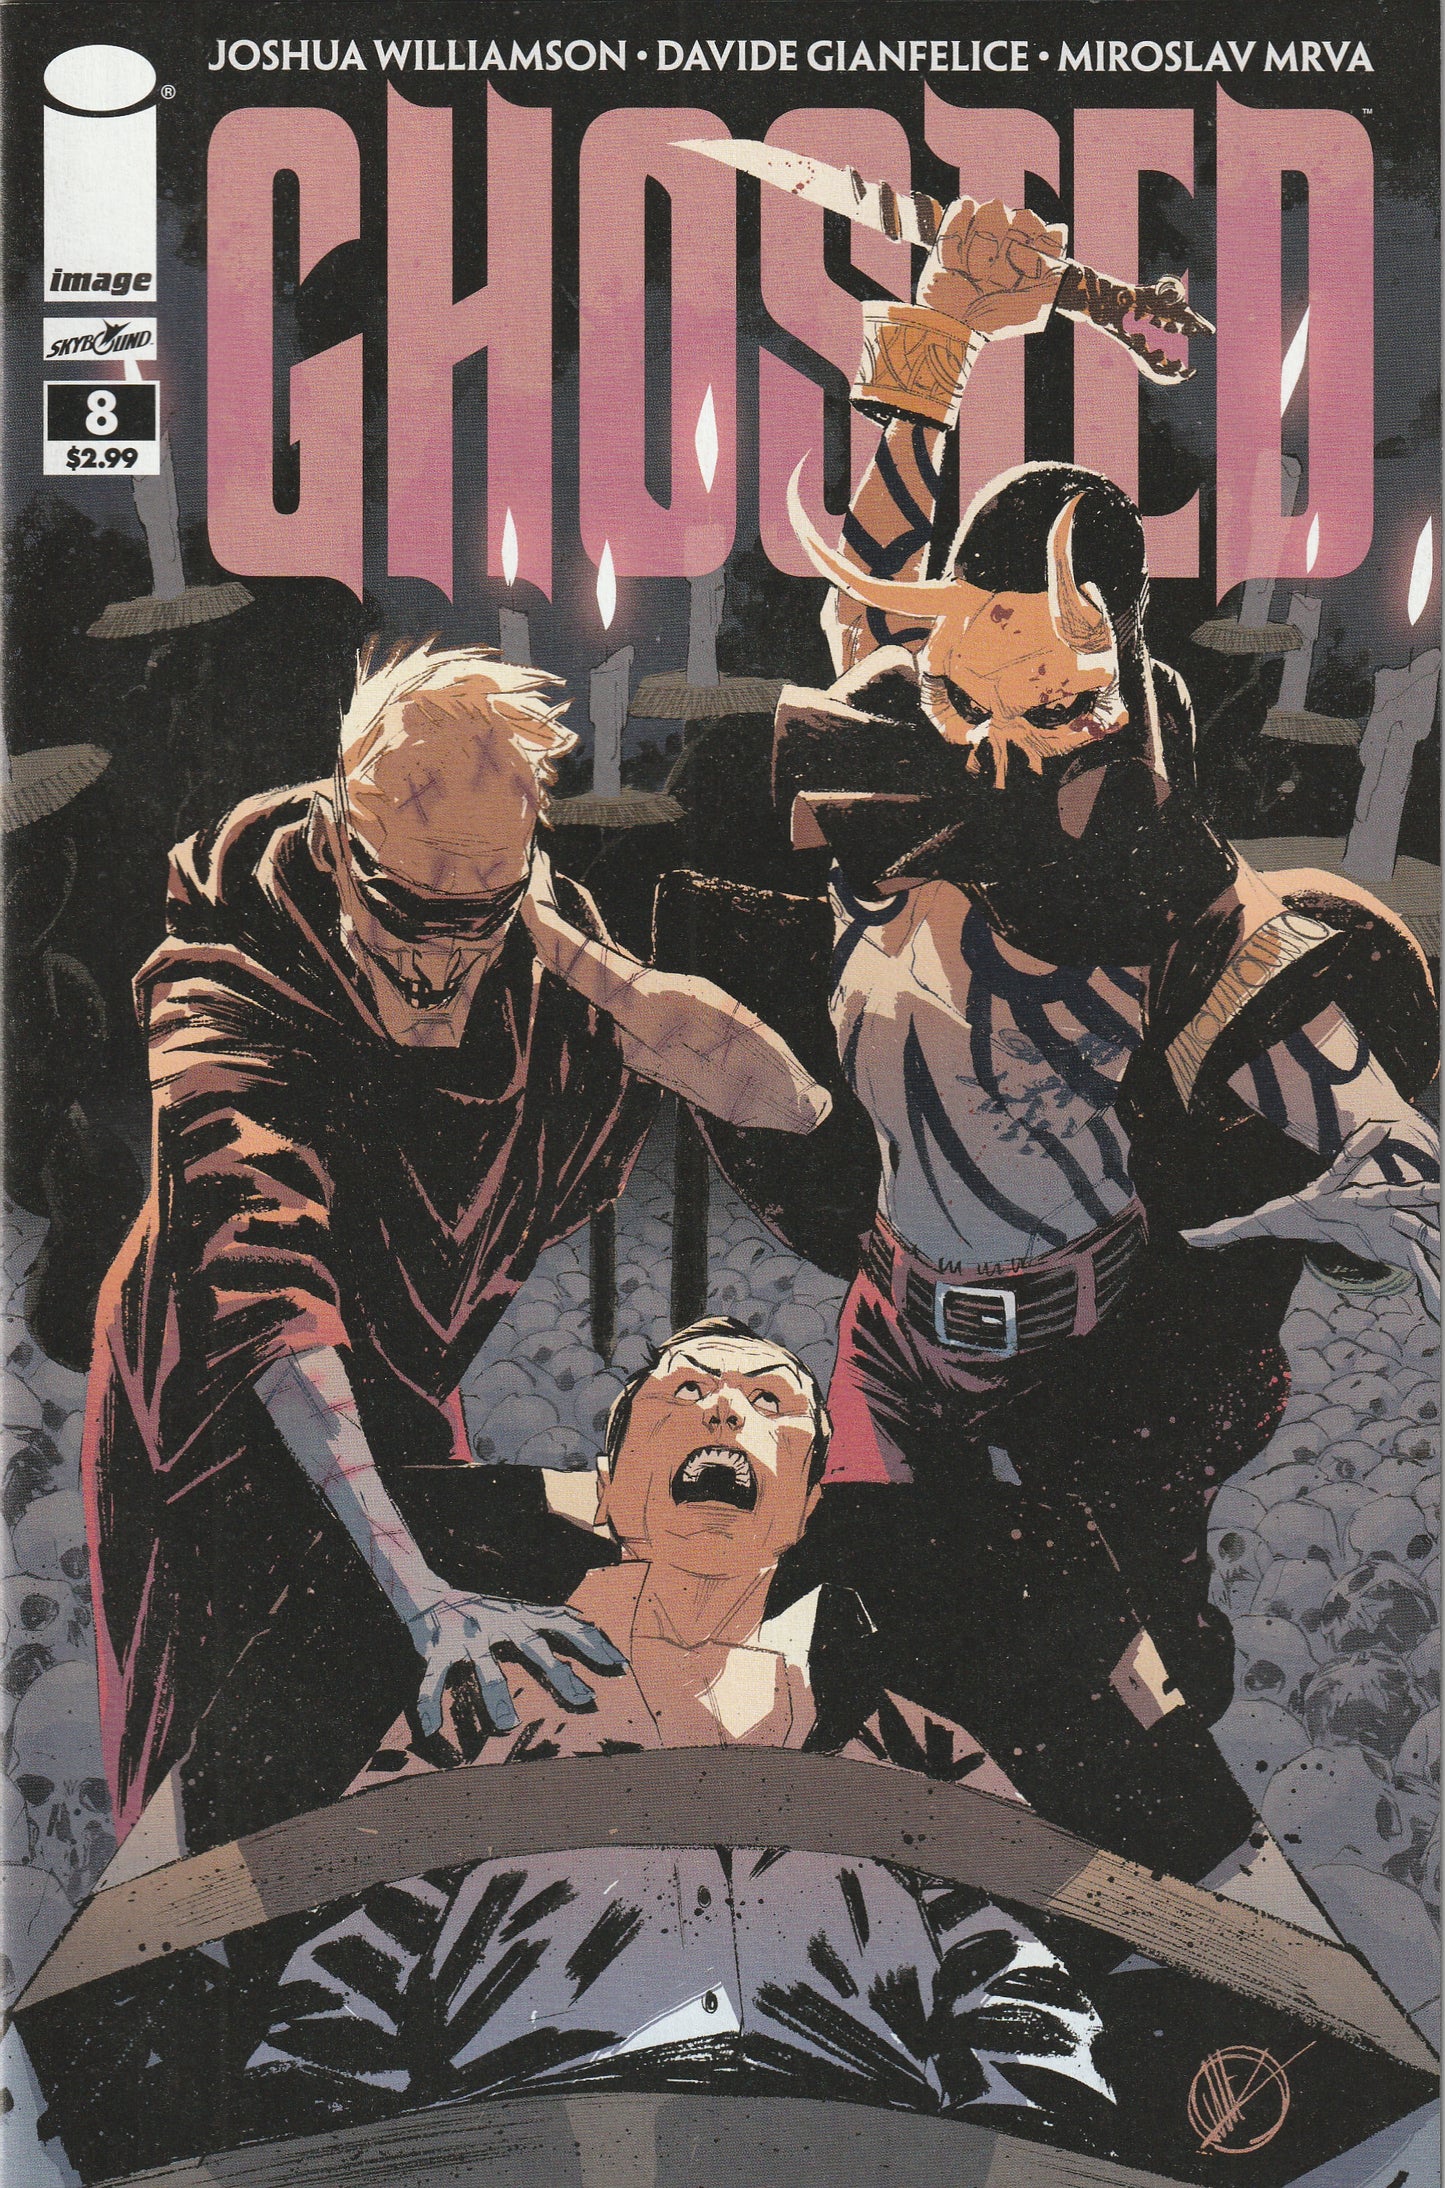 Ghosted #8 (2014)